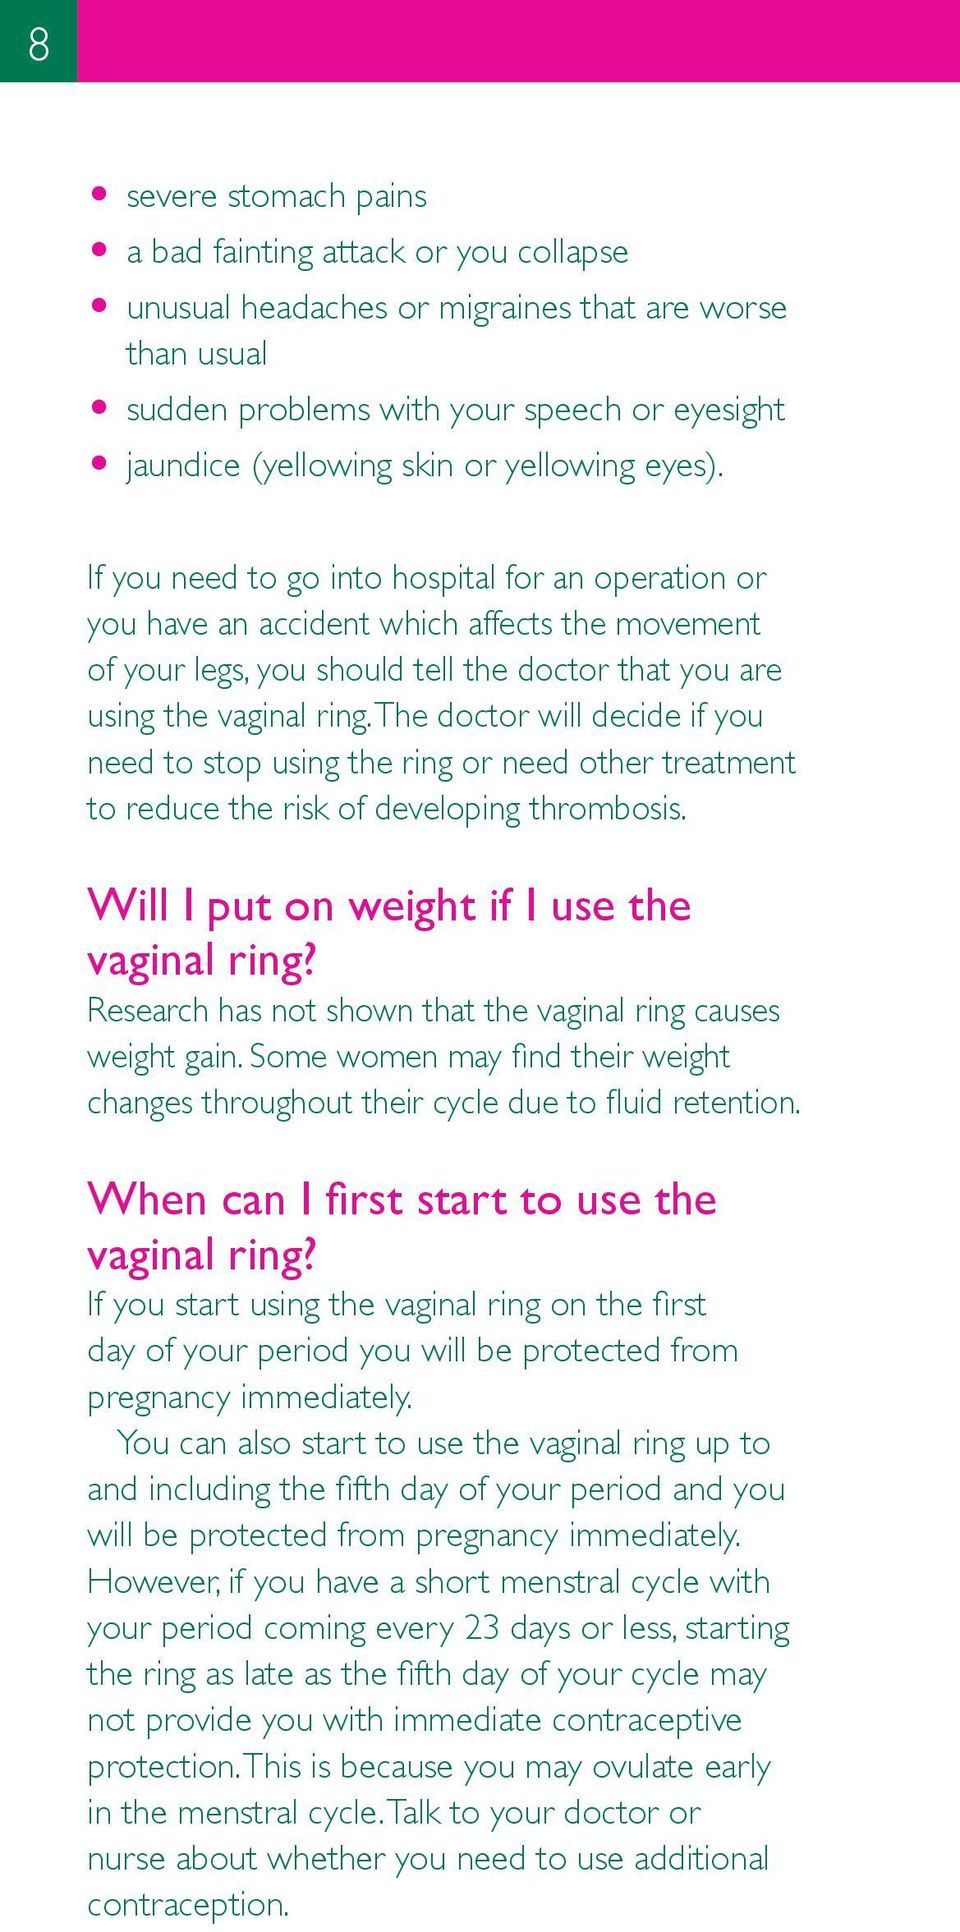 The doctor will decide if you need to stop using the ring or need other treatment to reduce the risk of developing thrombosis. Will I put on weight if I use the vaginal ring?